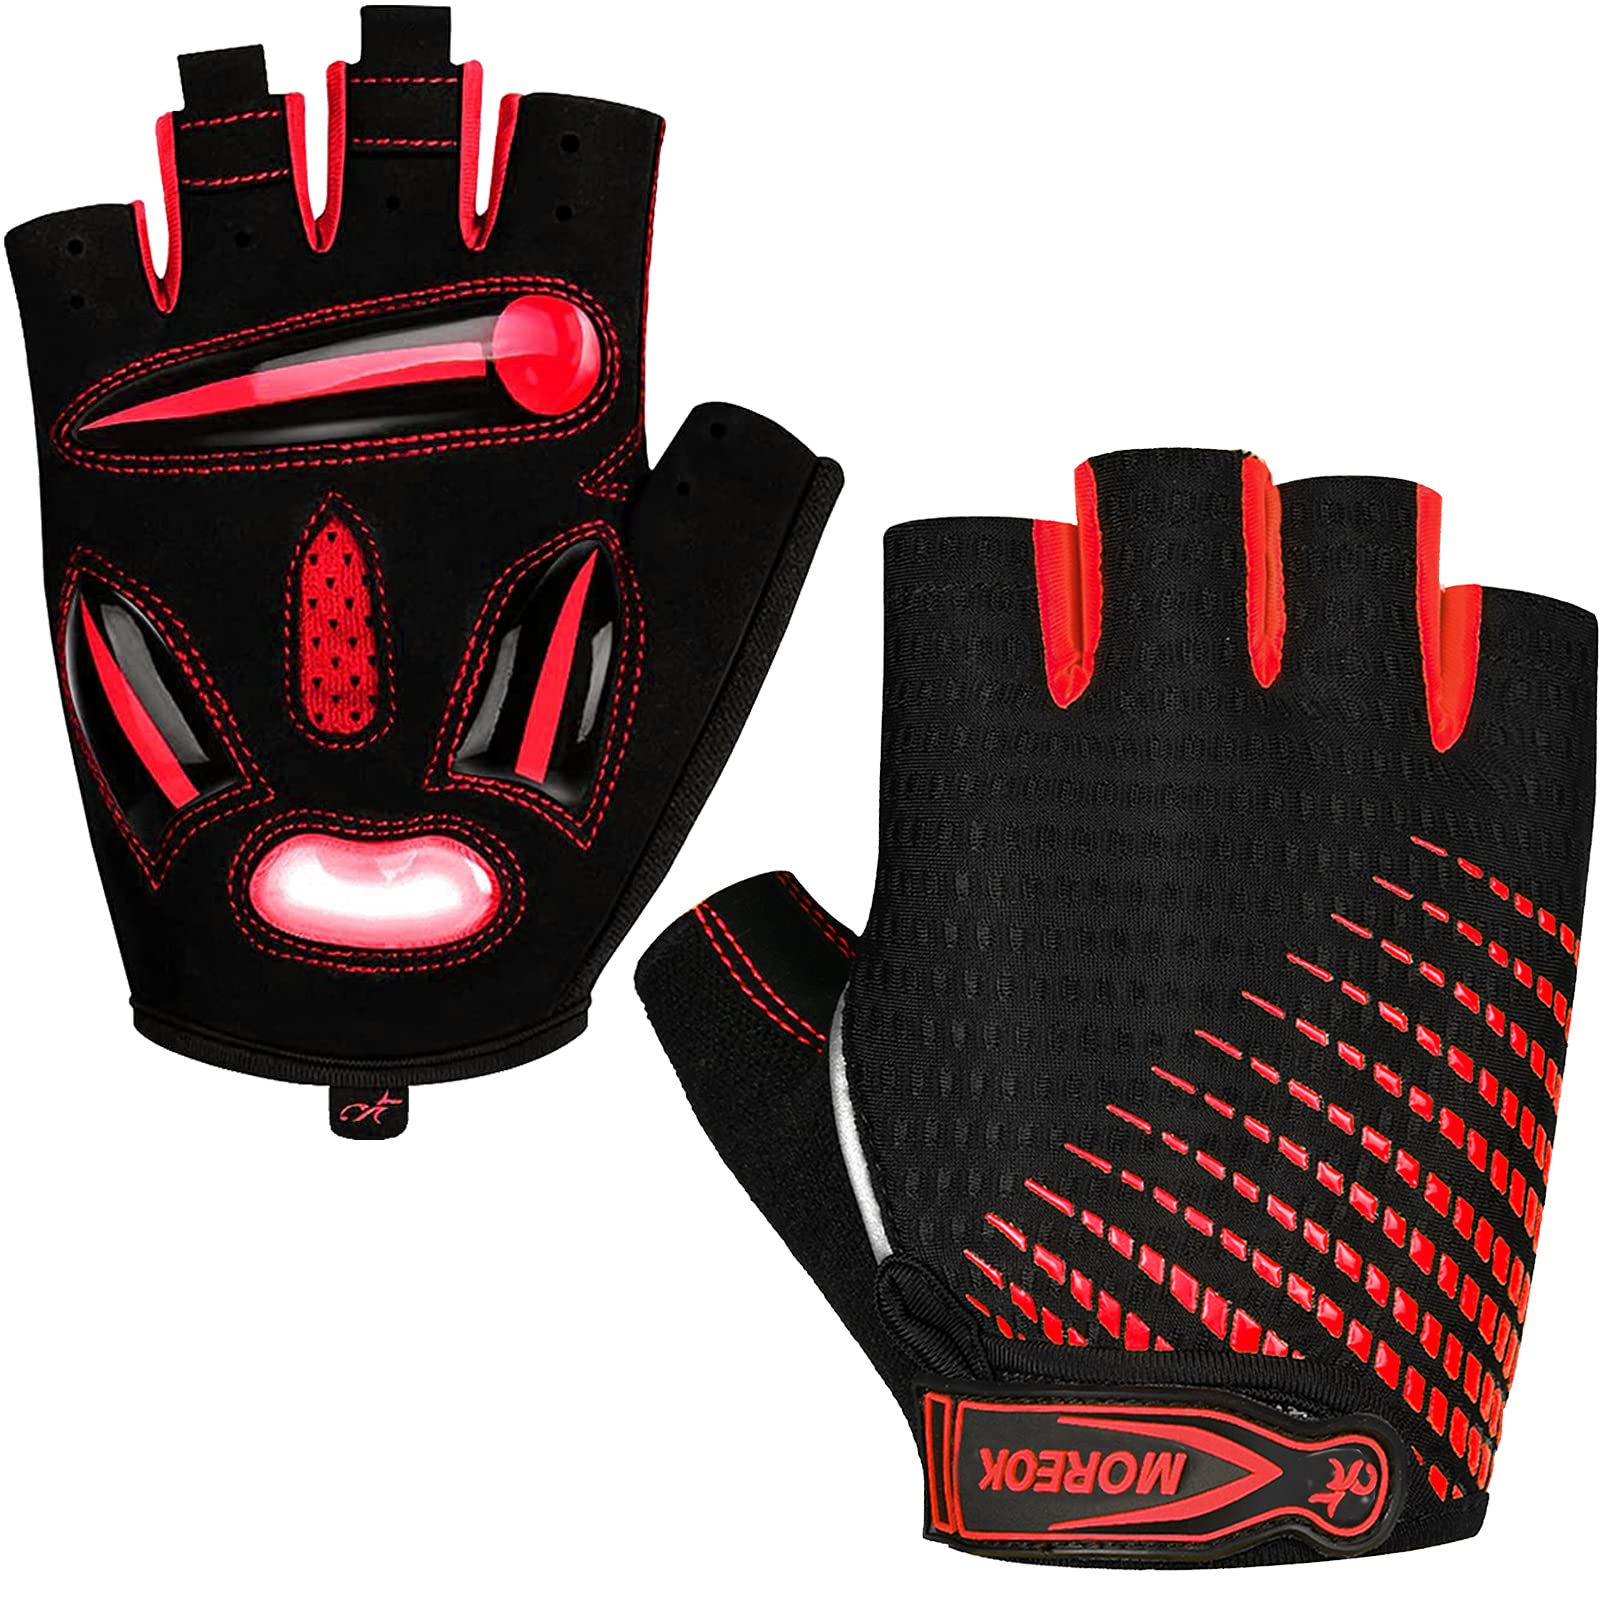 MOREOK XL Light Red Cycling Gloves 45% off -- $11